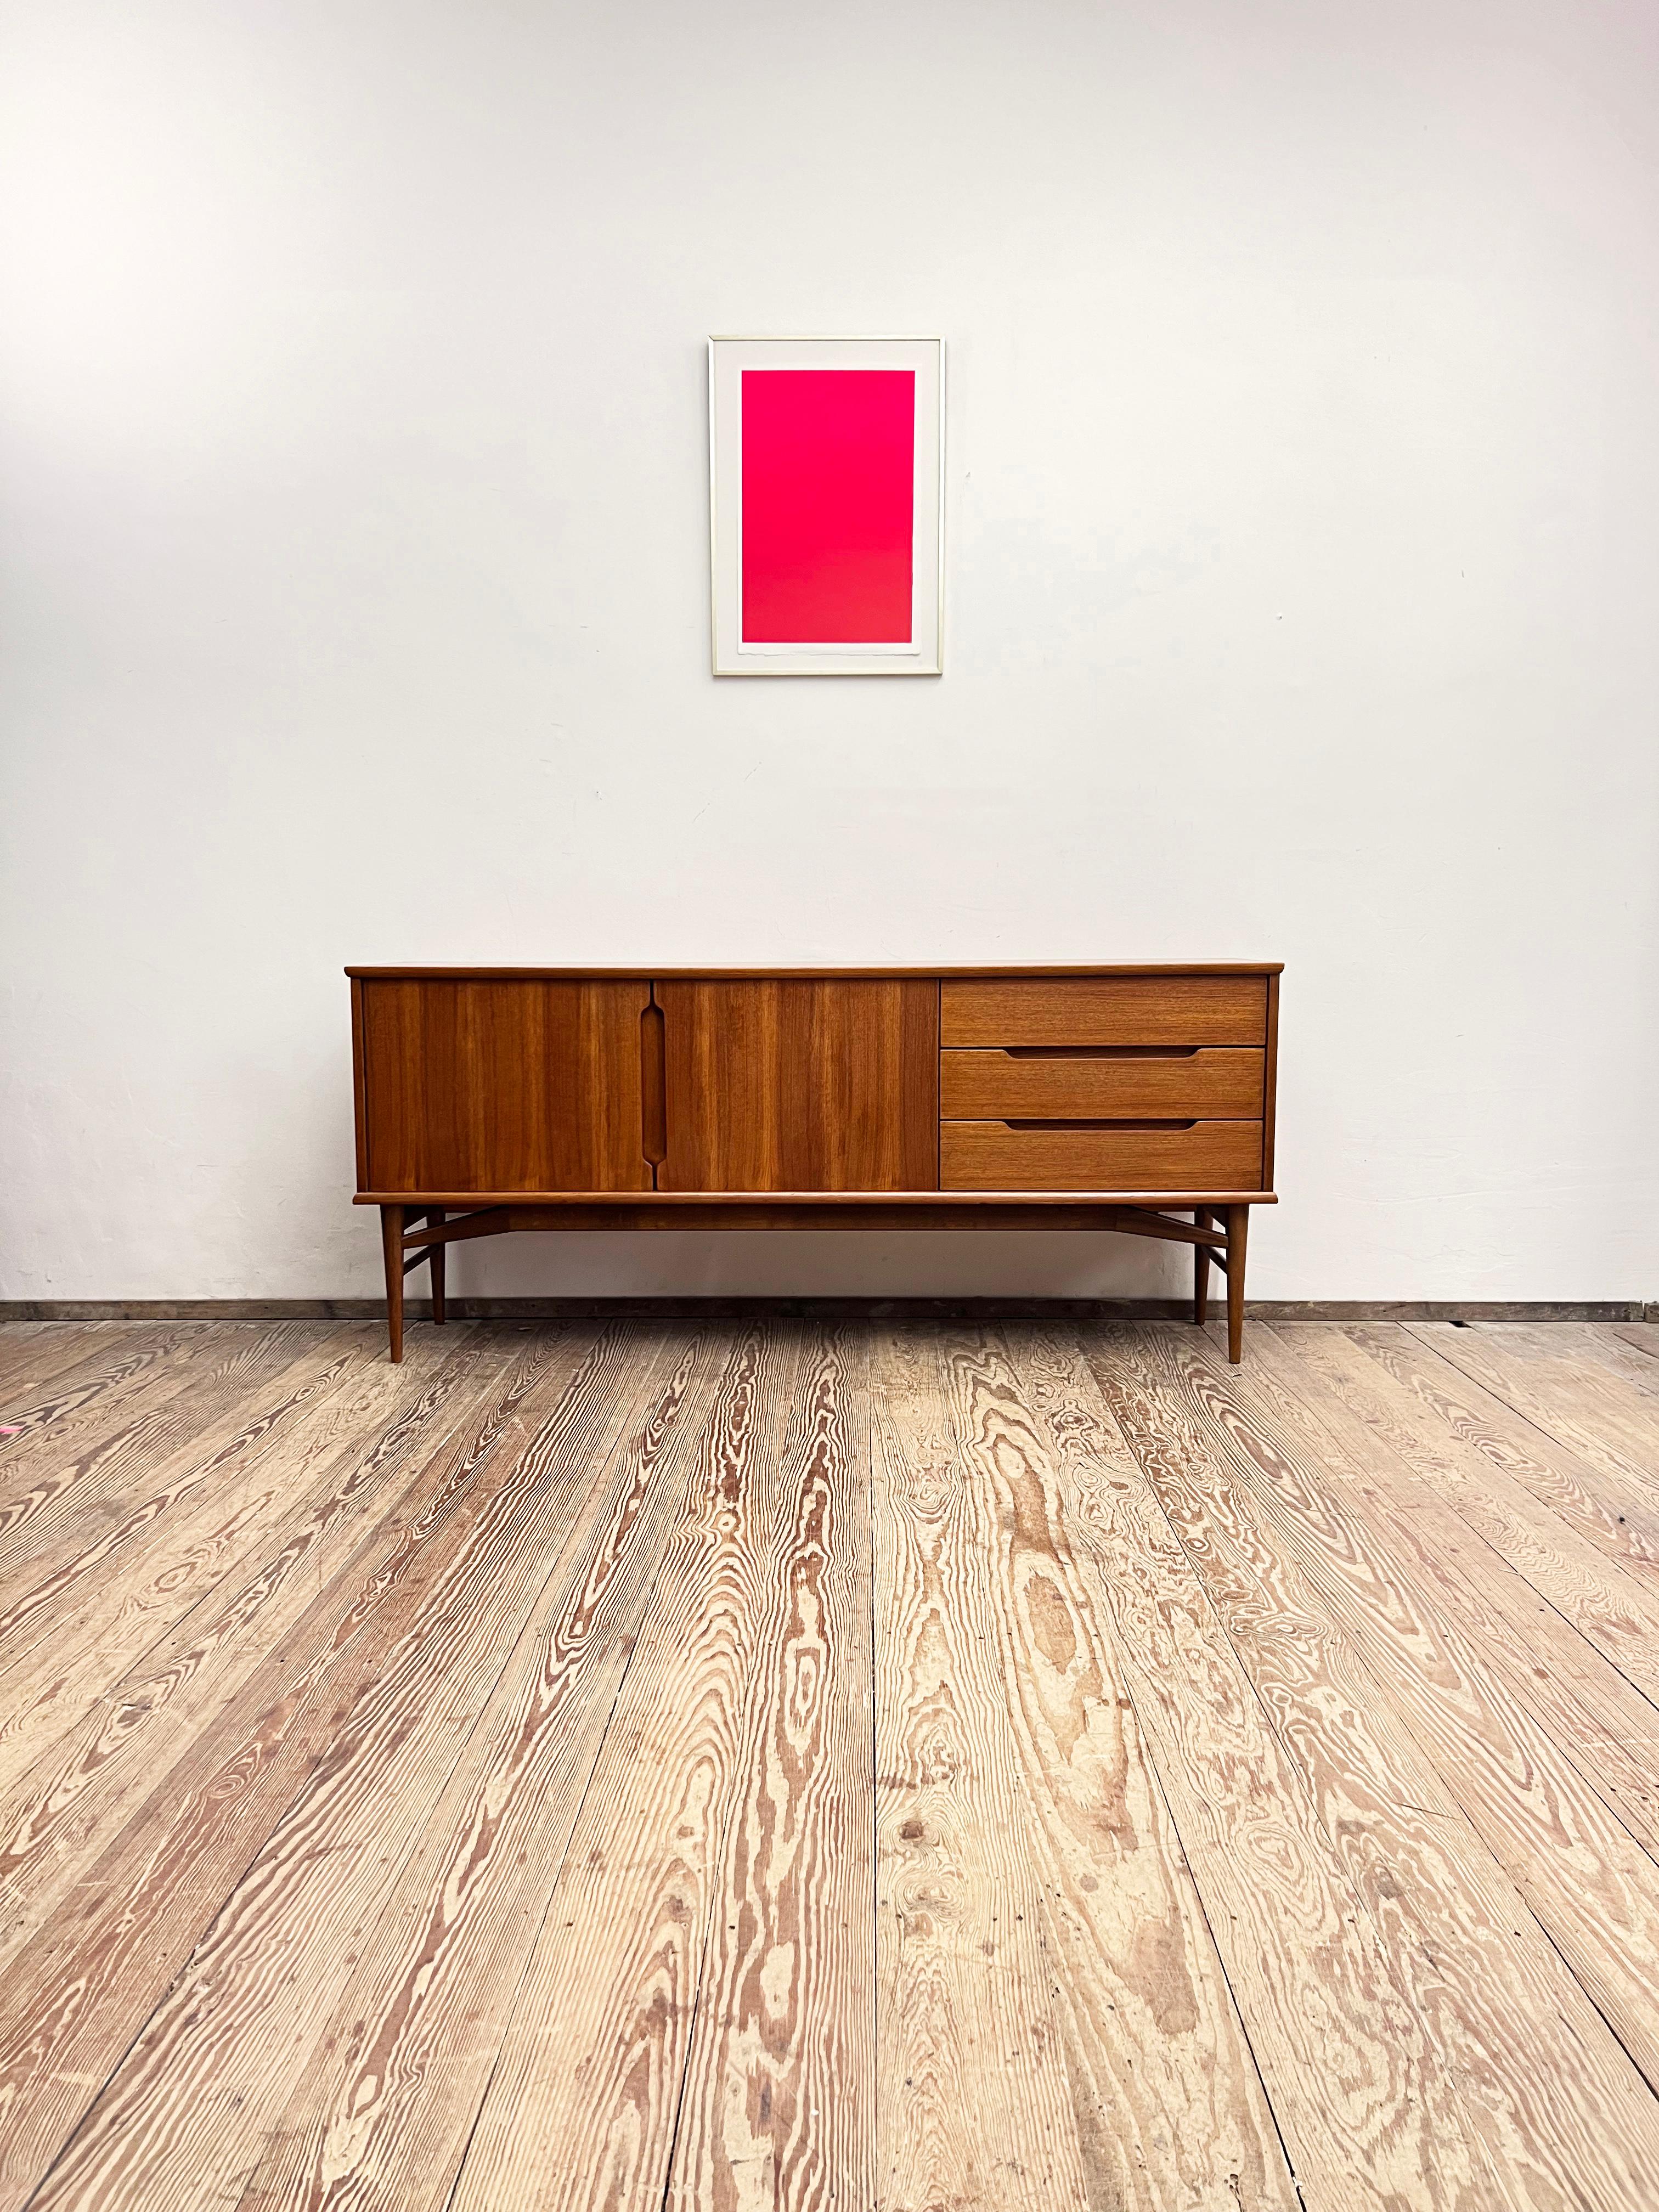 Dimensions: 188 x 43 x 82,5 cm (Width x Depth x Height)

This design sideboard or TV console was manufactured in the 1950s in Germany.

The mid-century Credenza showcases exquisite design and offers lots of storage space on tapered legs and lots of